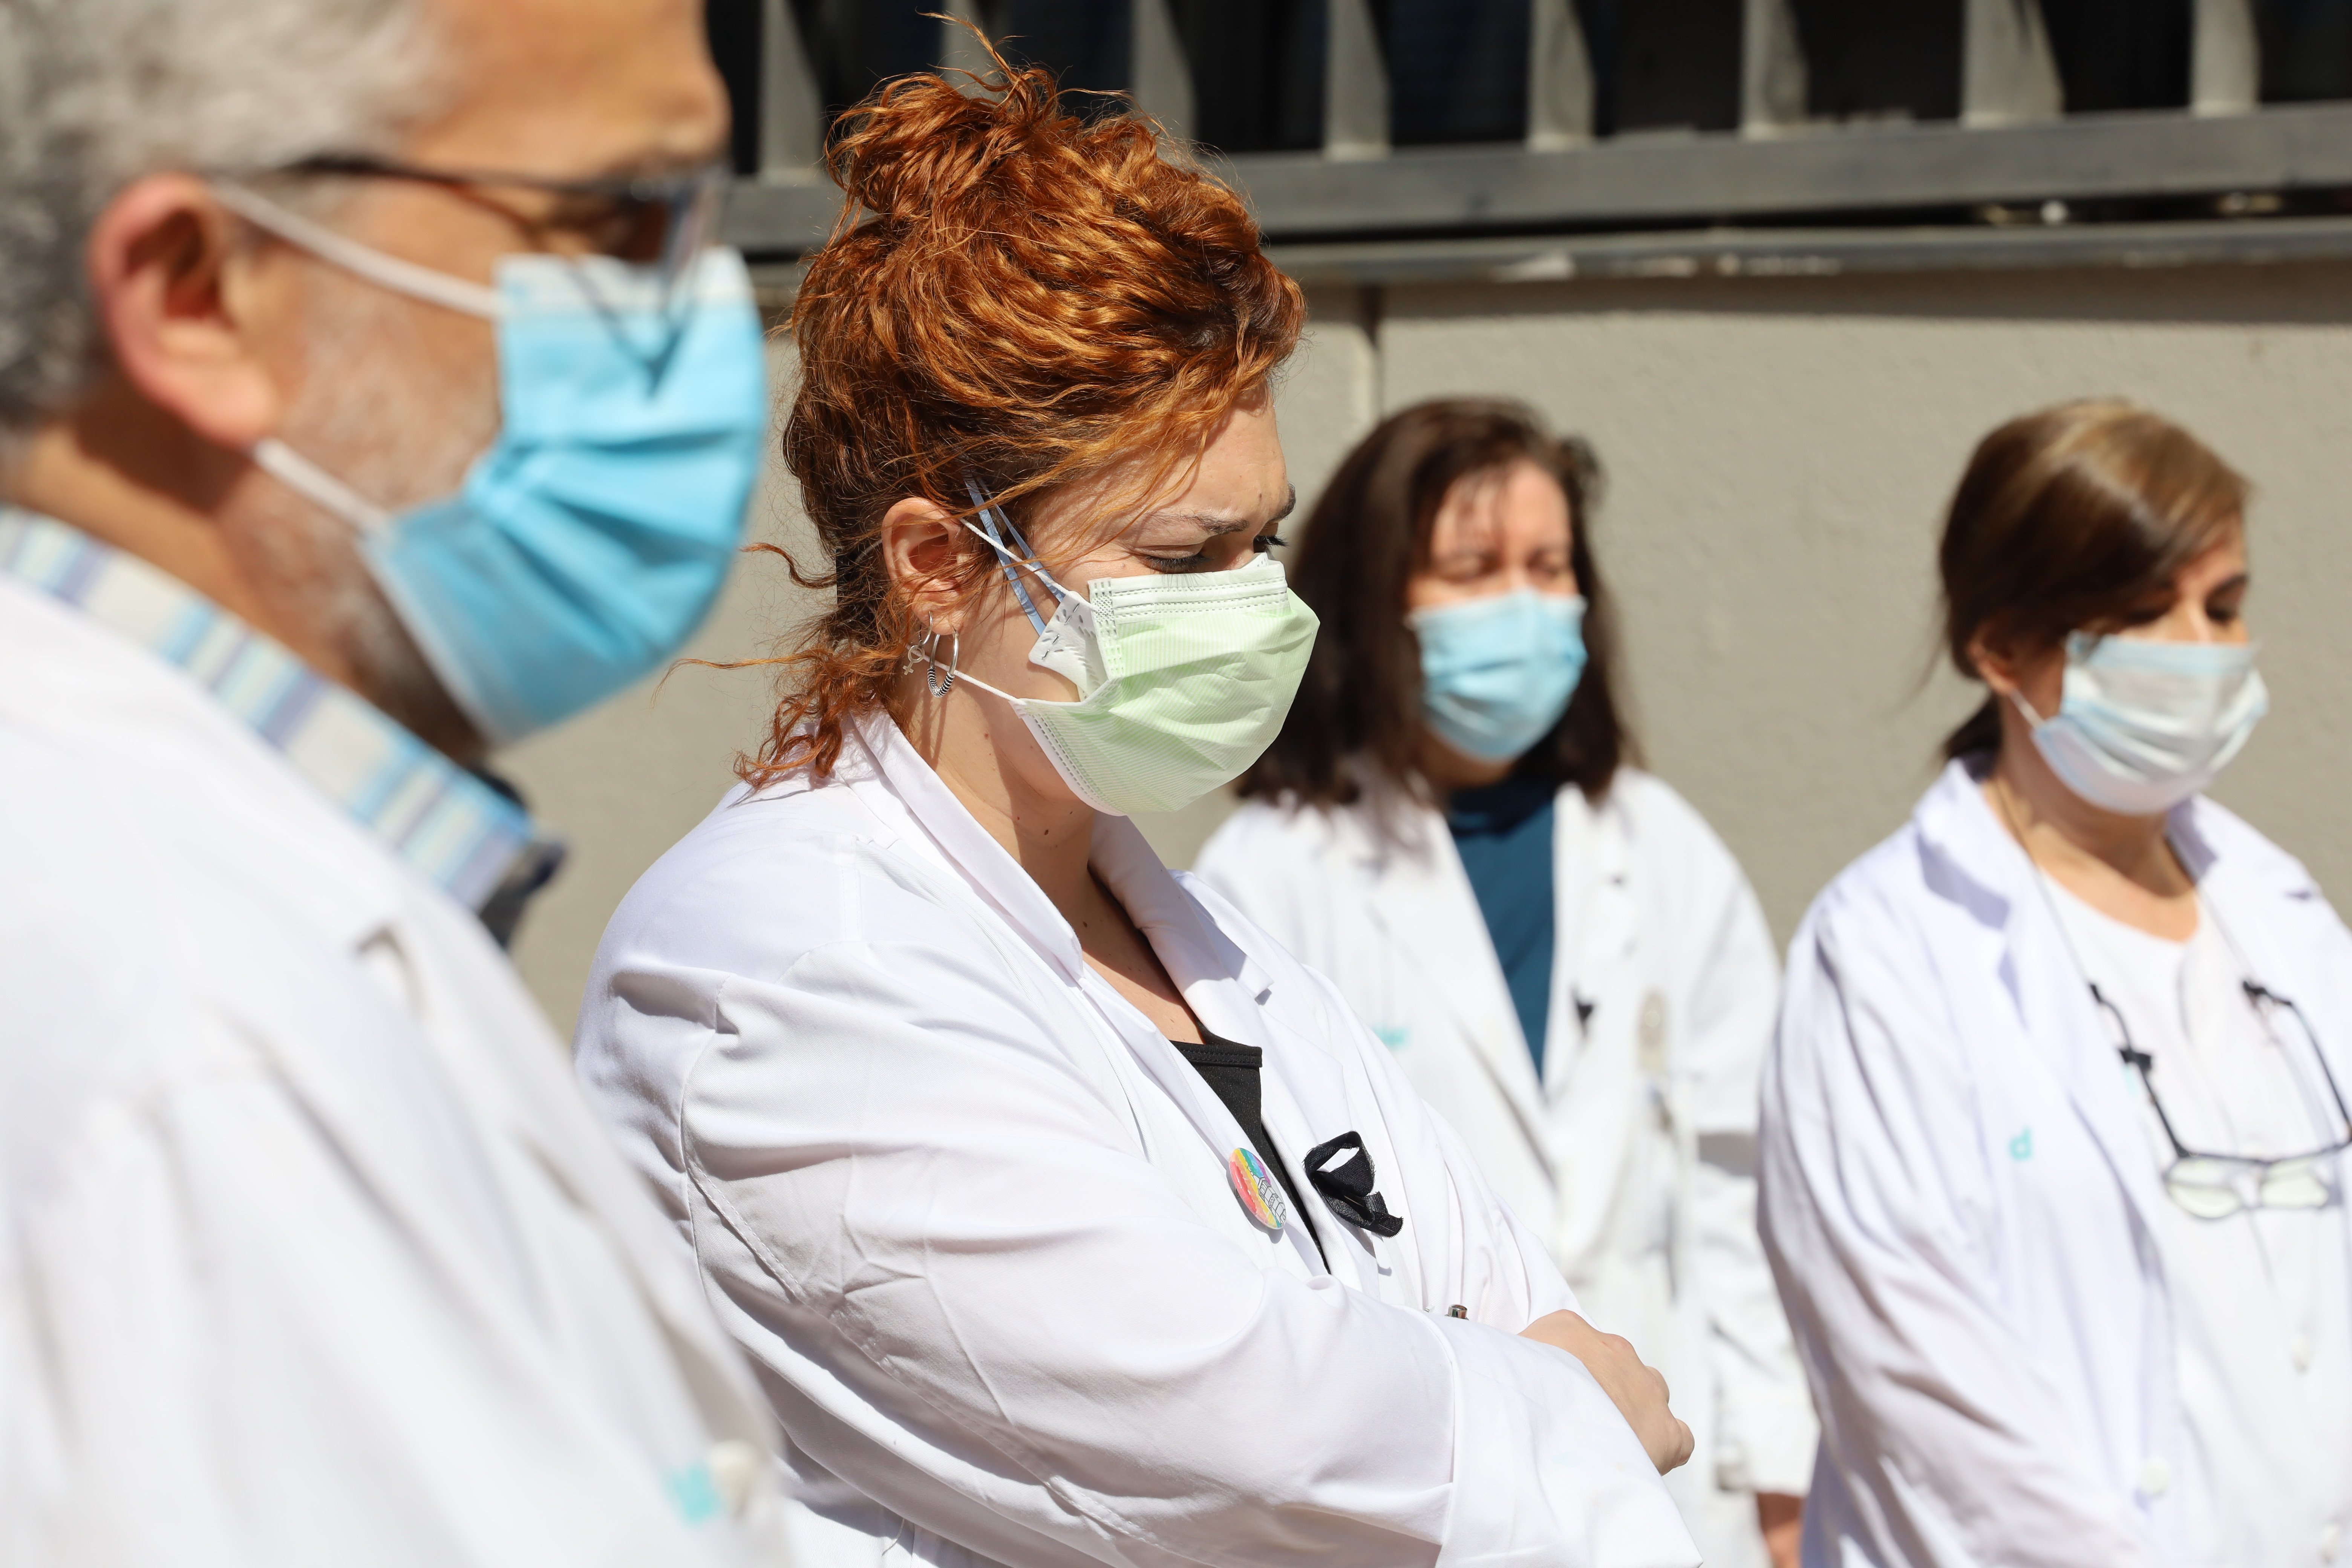 Catalan doctors call for measures to avoid a coronavirus second wave